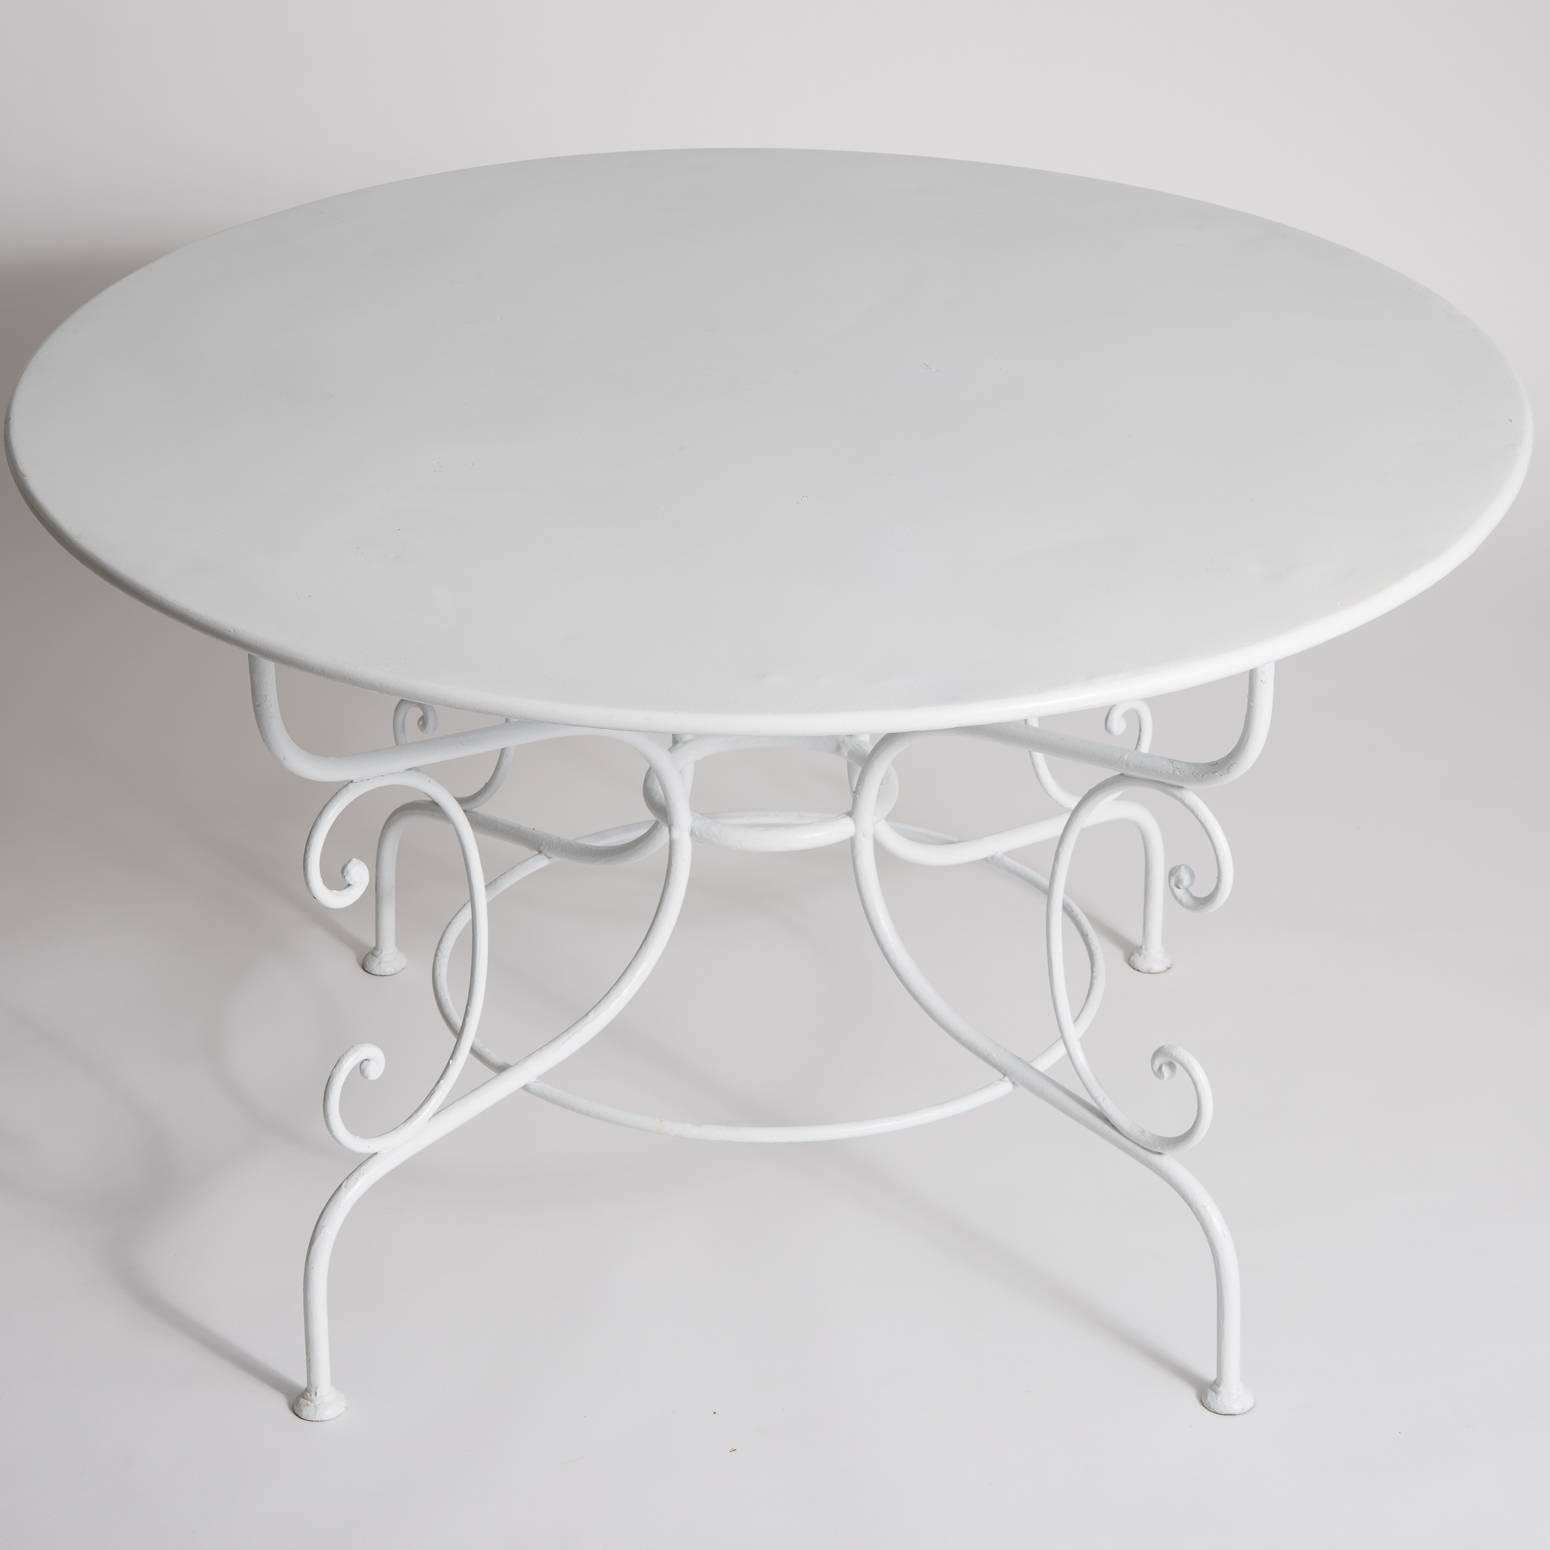 This great Classic French garden dining table seats six and has an intricate scroll base. It has recently been repainted in weather resistant outdoor paint.

Note: Pictured with French wrought iron chairs, Dawn Hill, available